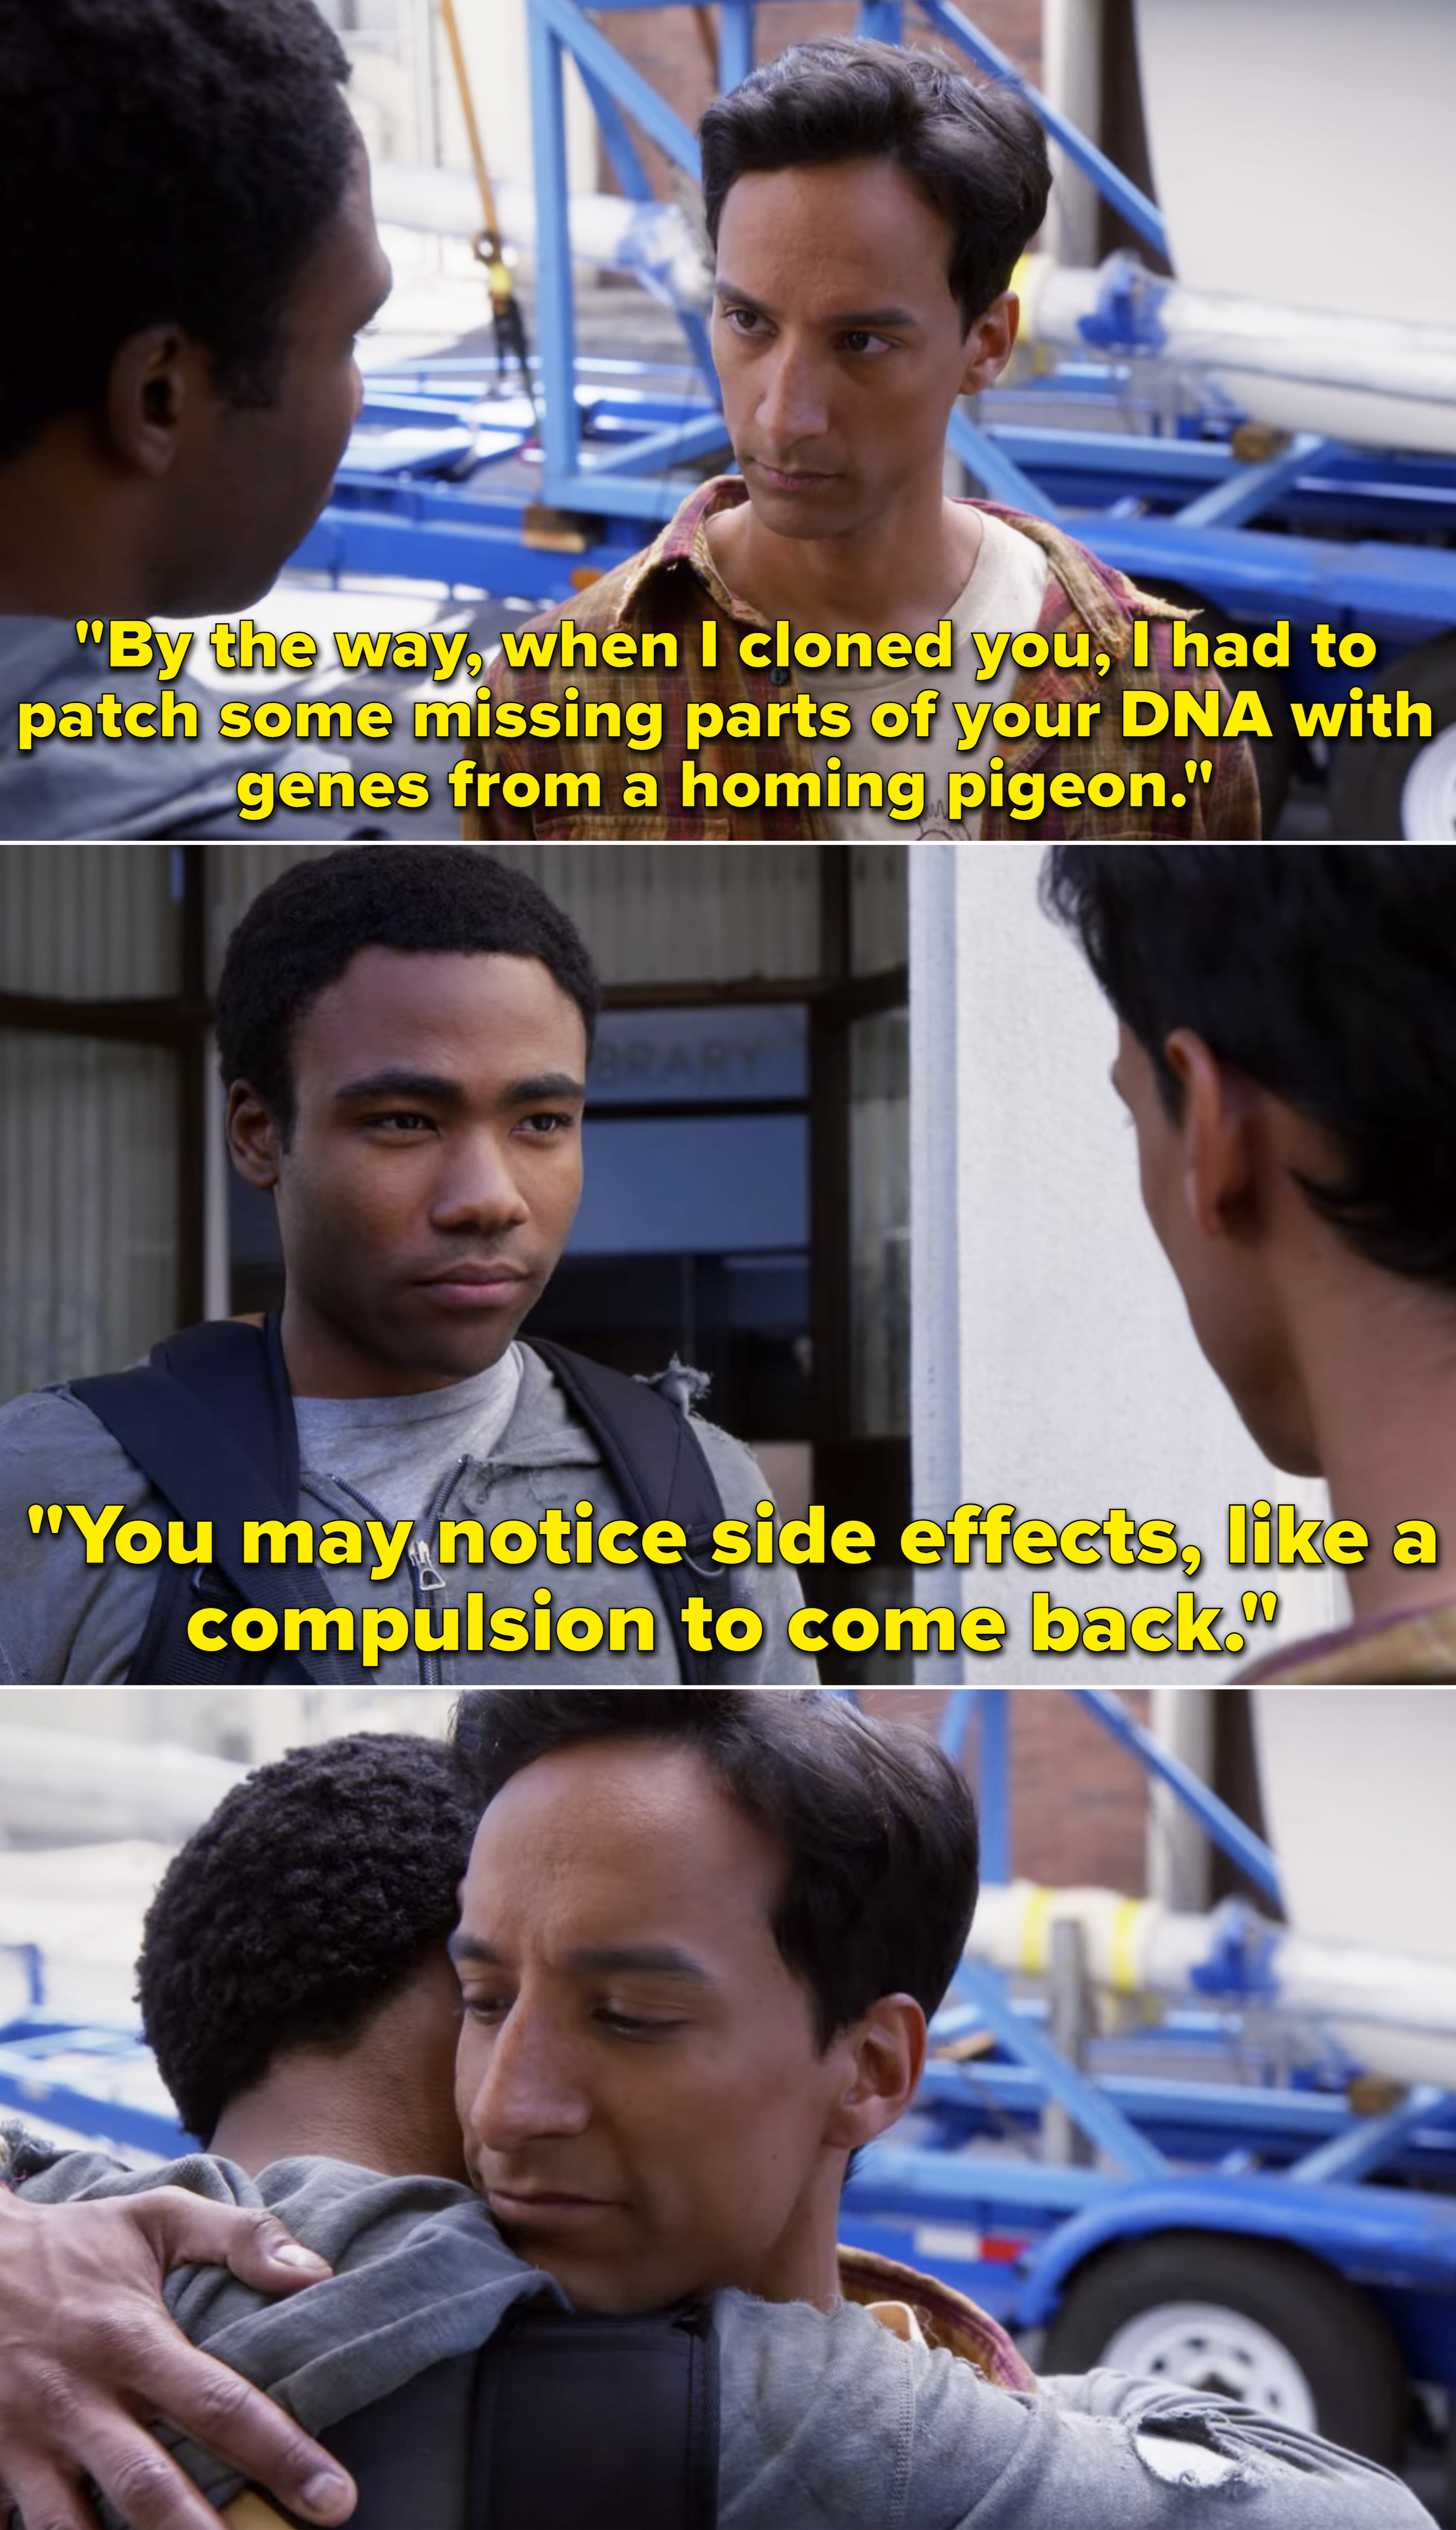 Abed telling Troy when he cloned him he used some genes from a &quot;homing pigeon&quot; so he&#x27;ll have to &quot;come back&quot; someday 